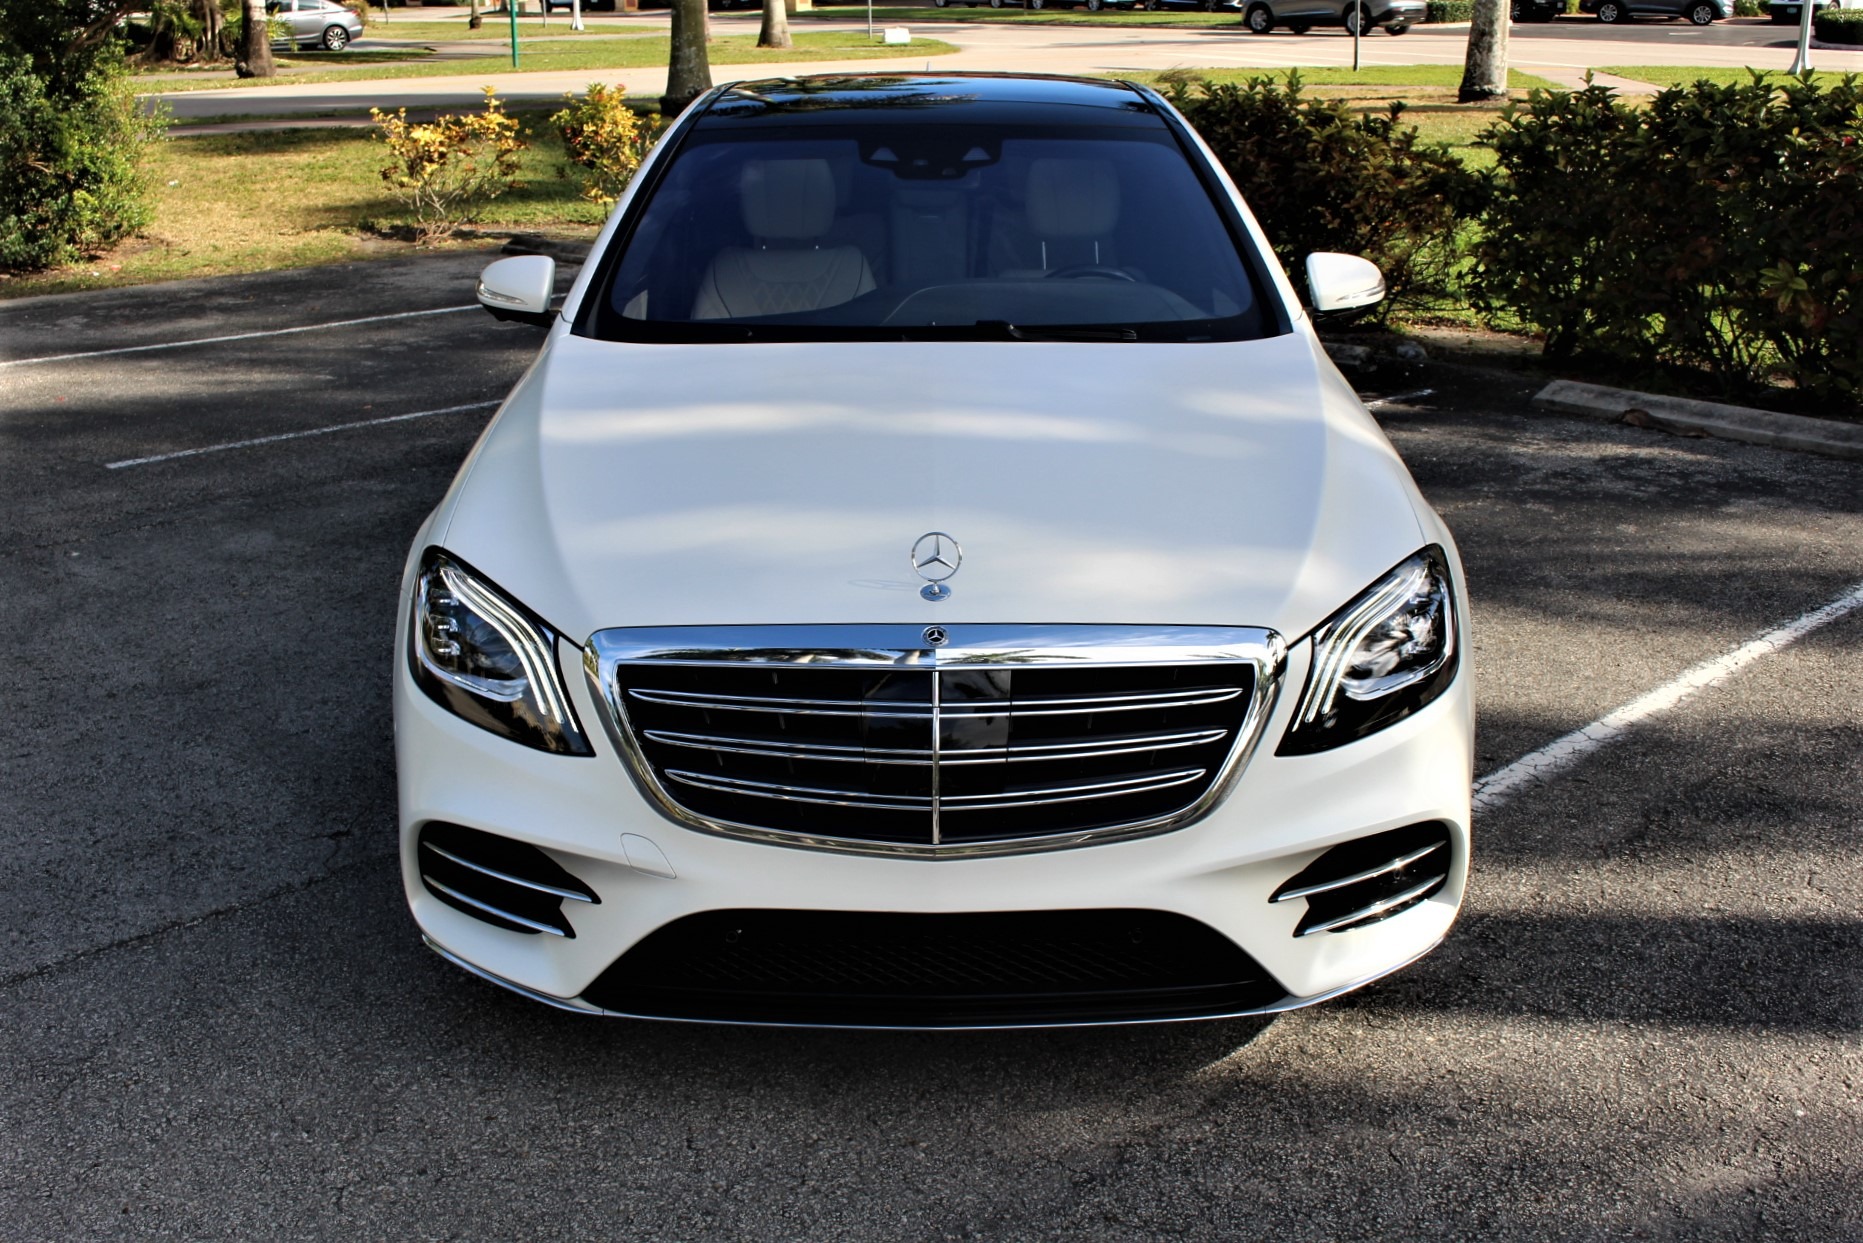 Used 2019 Mercedes-Benz S-Class S 560 for sale Sold at The Gables Sports Cars in Miami FL 33146 3